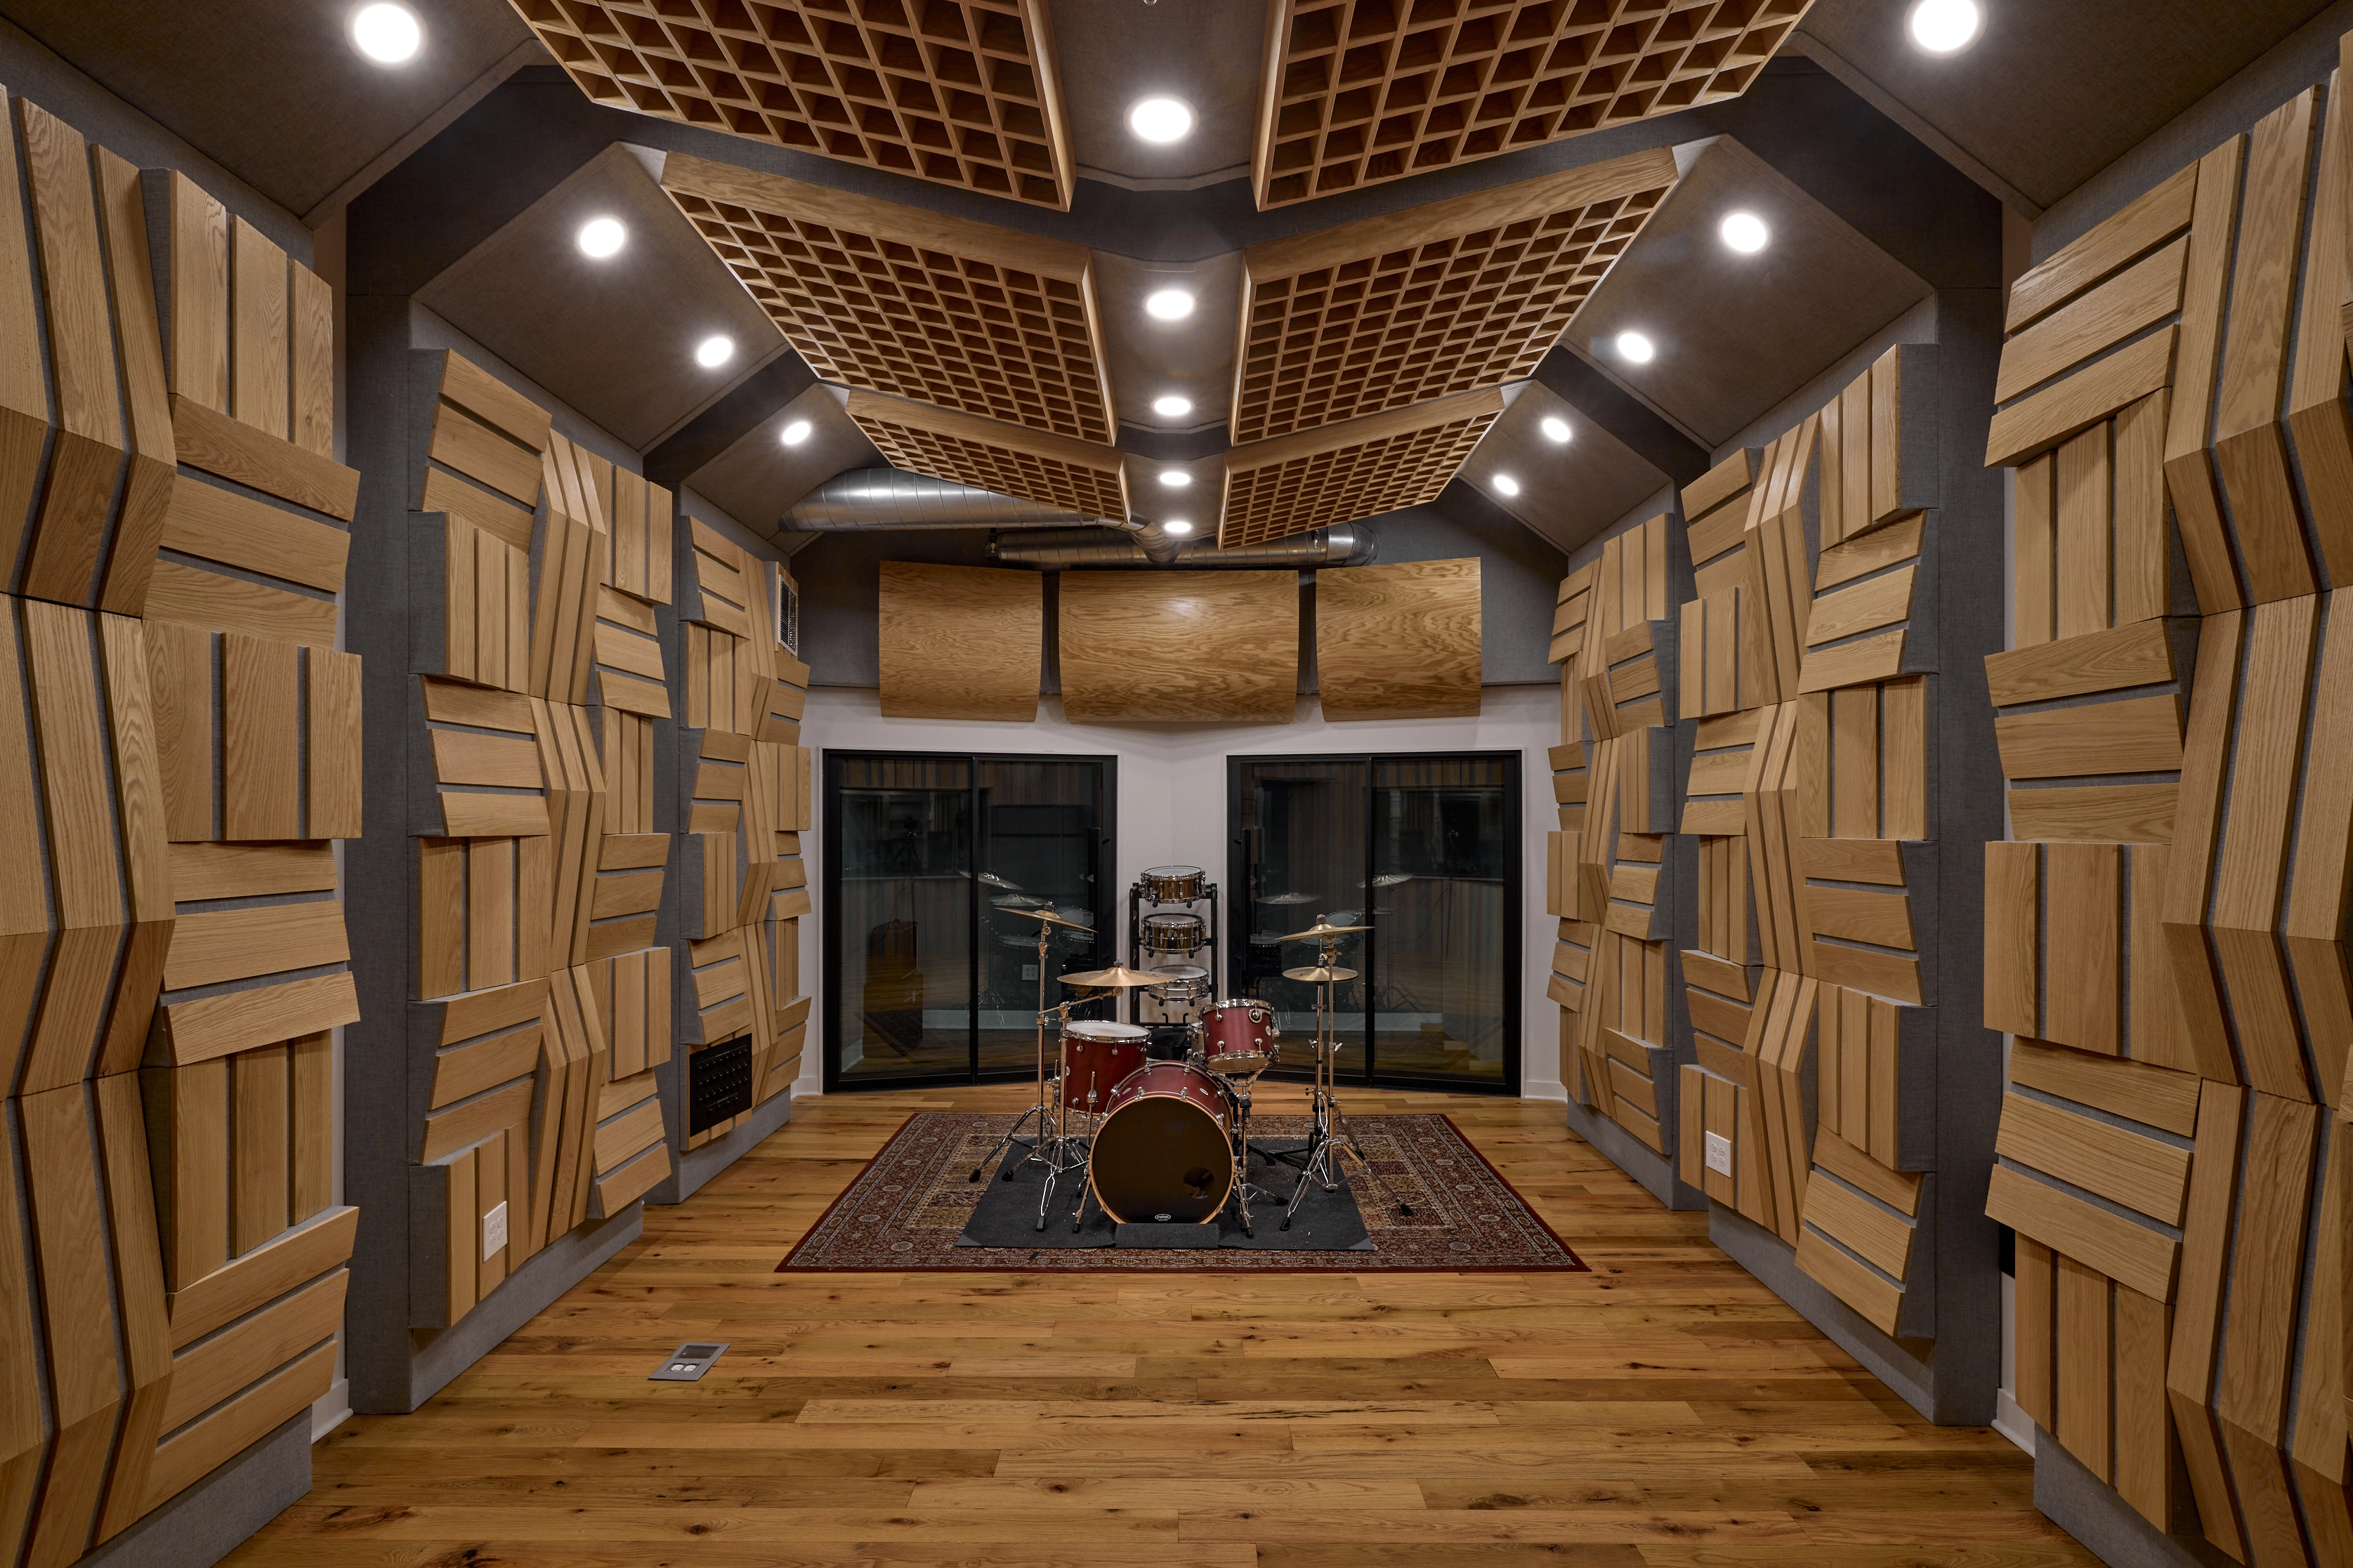 Live room with sound-proof walls and drumset.